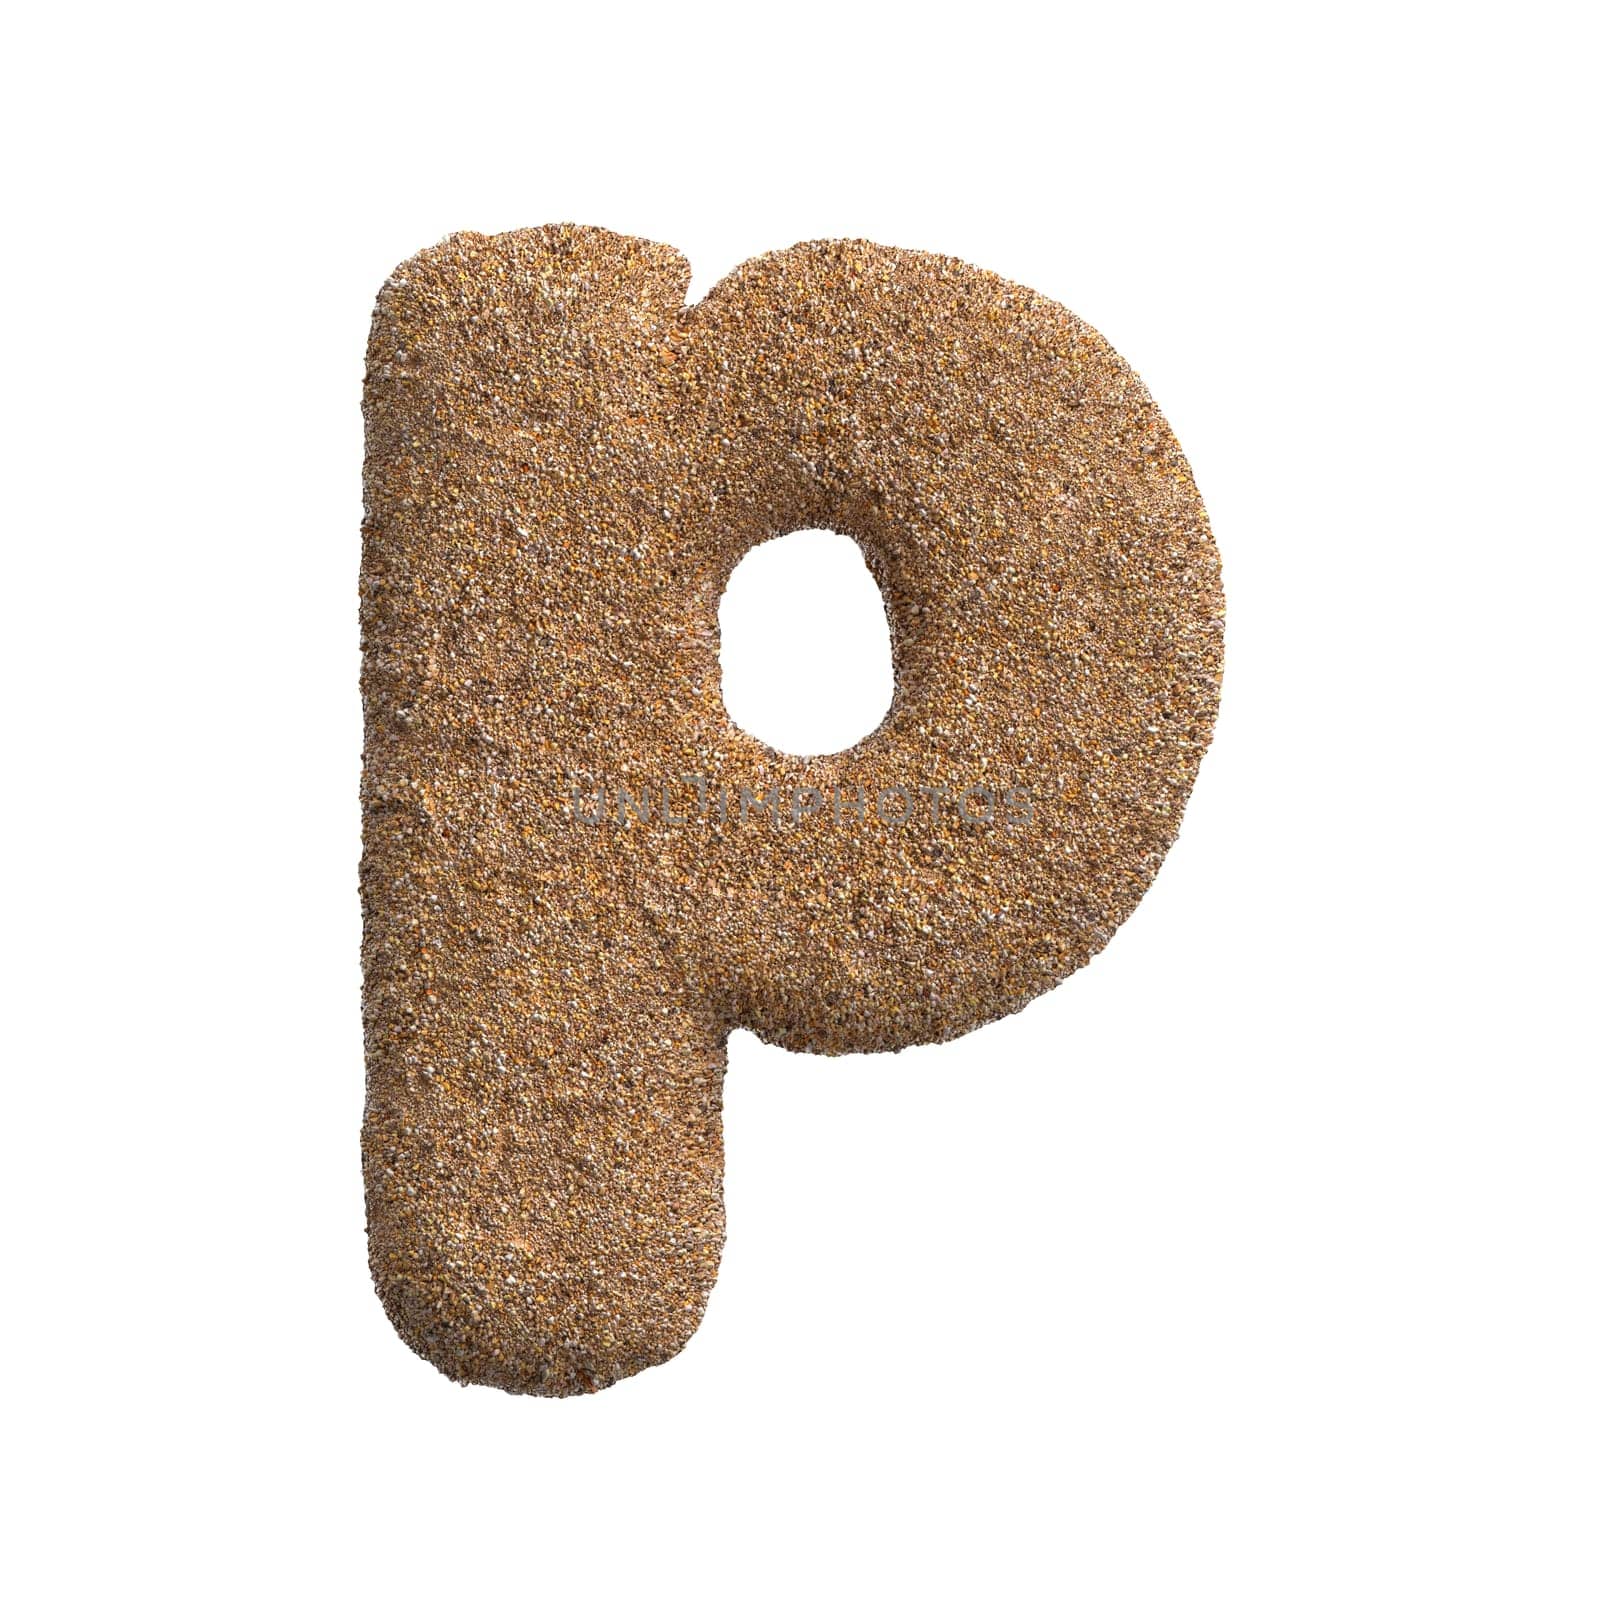 Sand letter P - Small 3d beach font isolated on white background. This alphabet is perfect for creative illustrations related but not limited to Holidays, travel, ocean...